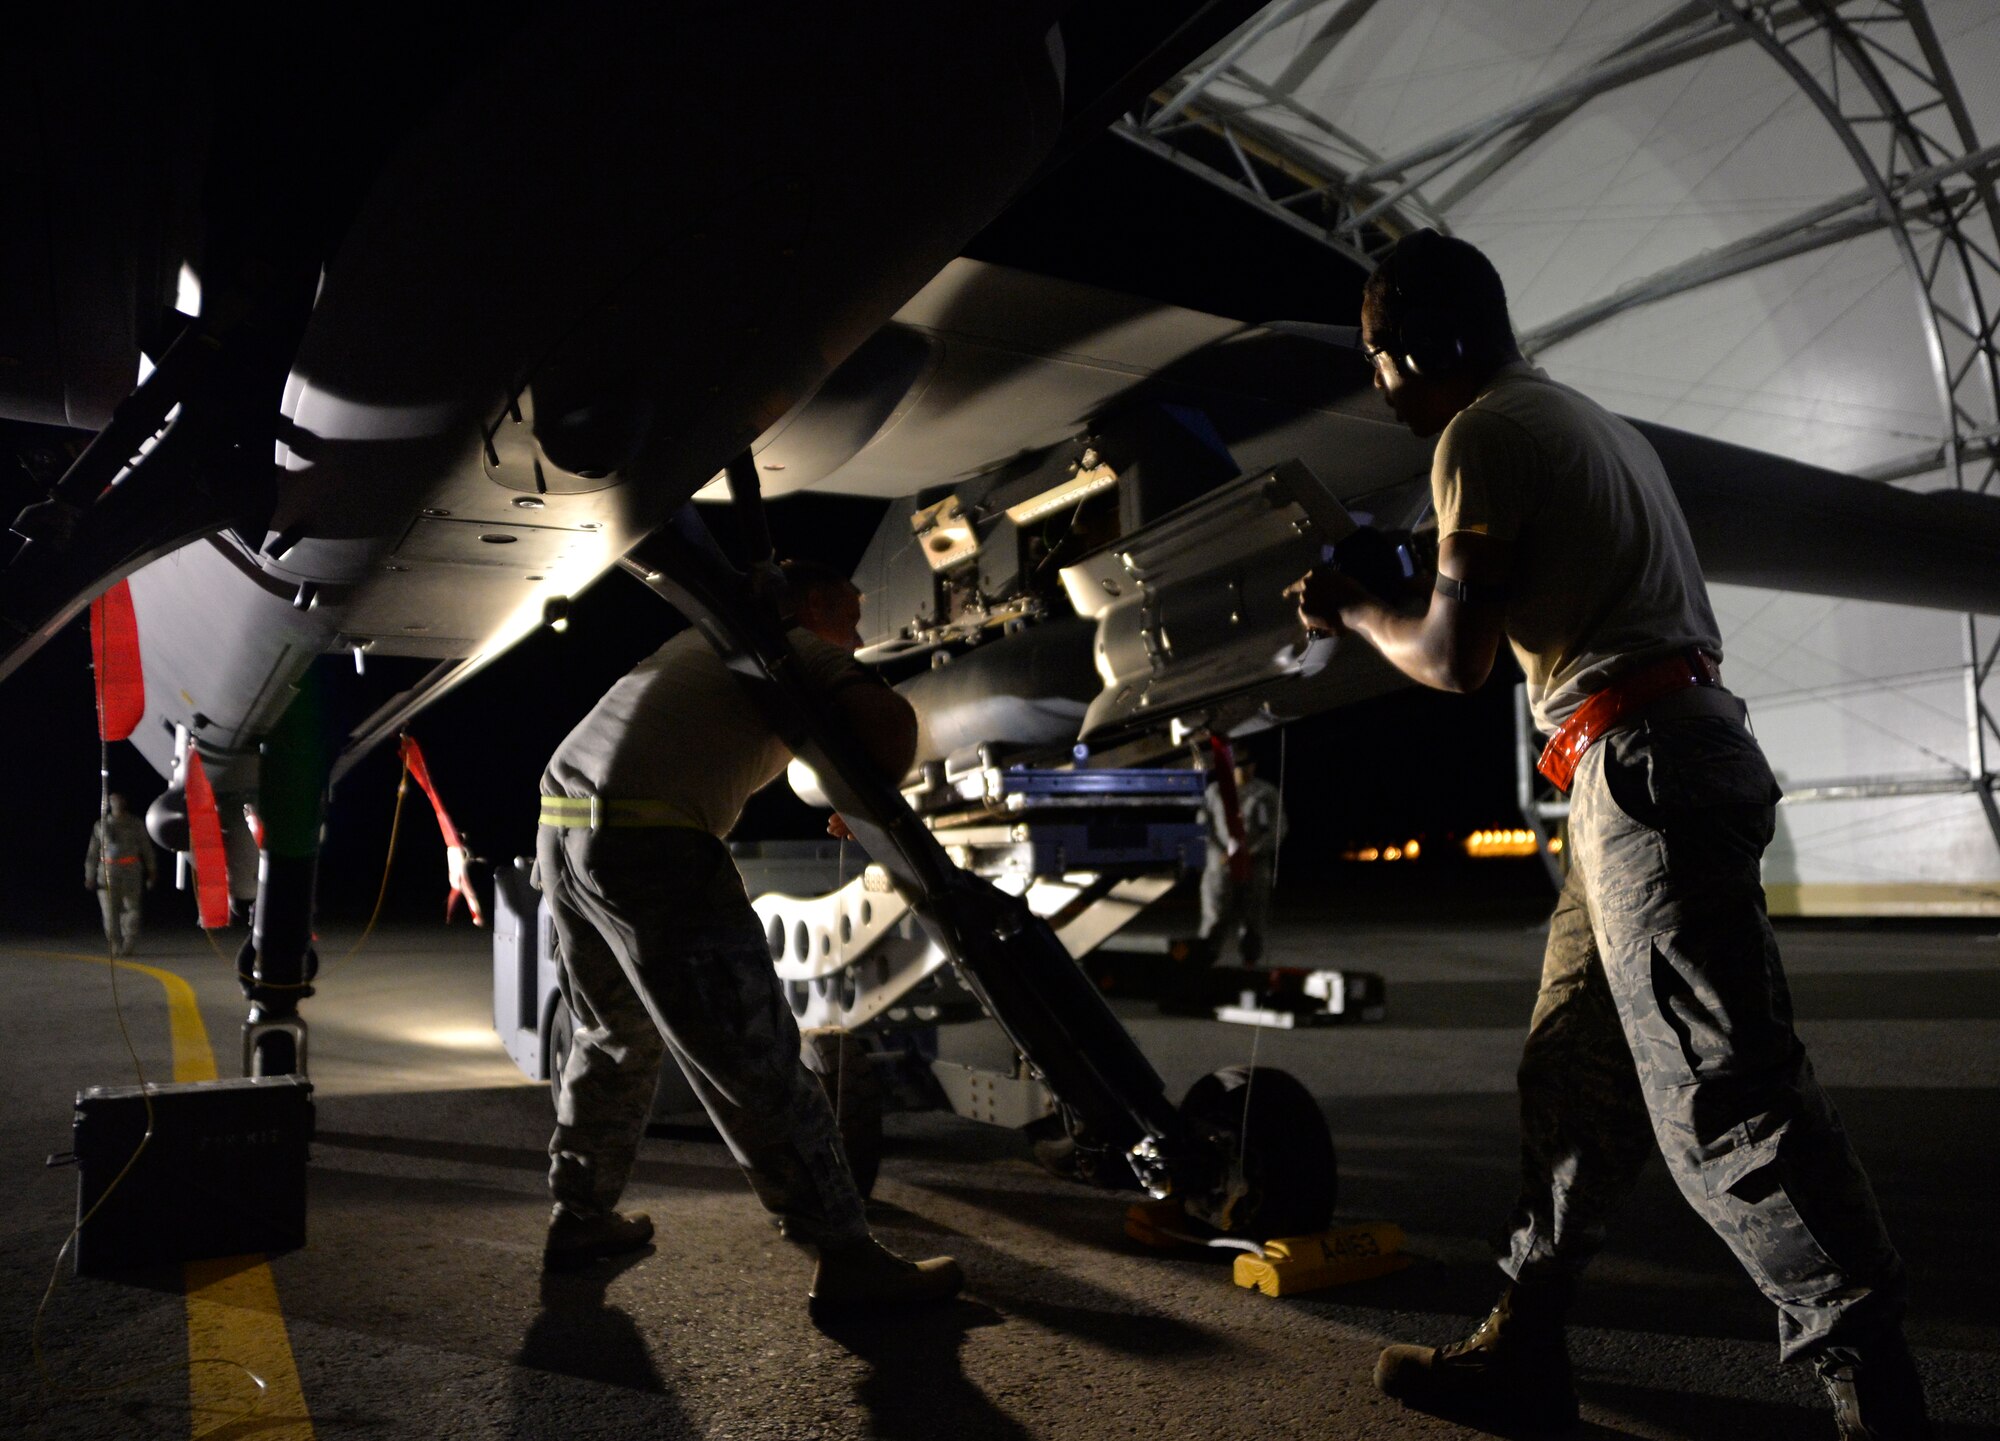 Airmen from the 432nd Aircraft Maintenance Squadron load a GBU-12 Paveway II laser-guided bomb on an MQ-0 Reaper Aug. 5, 2015, at Creech Air Force Base, Nevada. The maintenance crew was evaluated on timeliness, safety, and precision of loading munitions on remotely piloted aircraft as part of the 2015 Air-Ground Weapons Systems Evaluation Program also known as Combat Hammer. (U.S. Air Force photo by Airman 1st Class Christian Clausen/Released)

